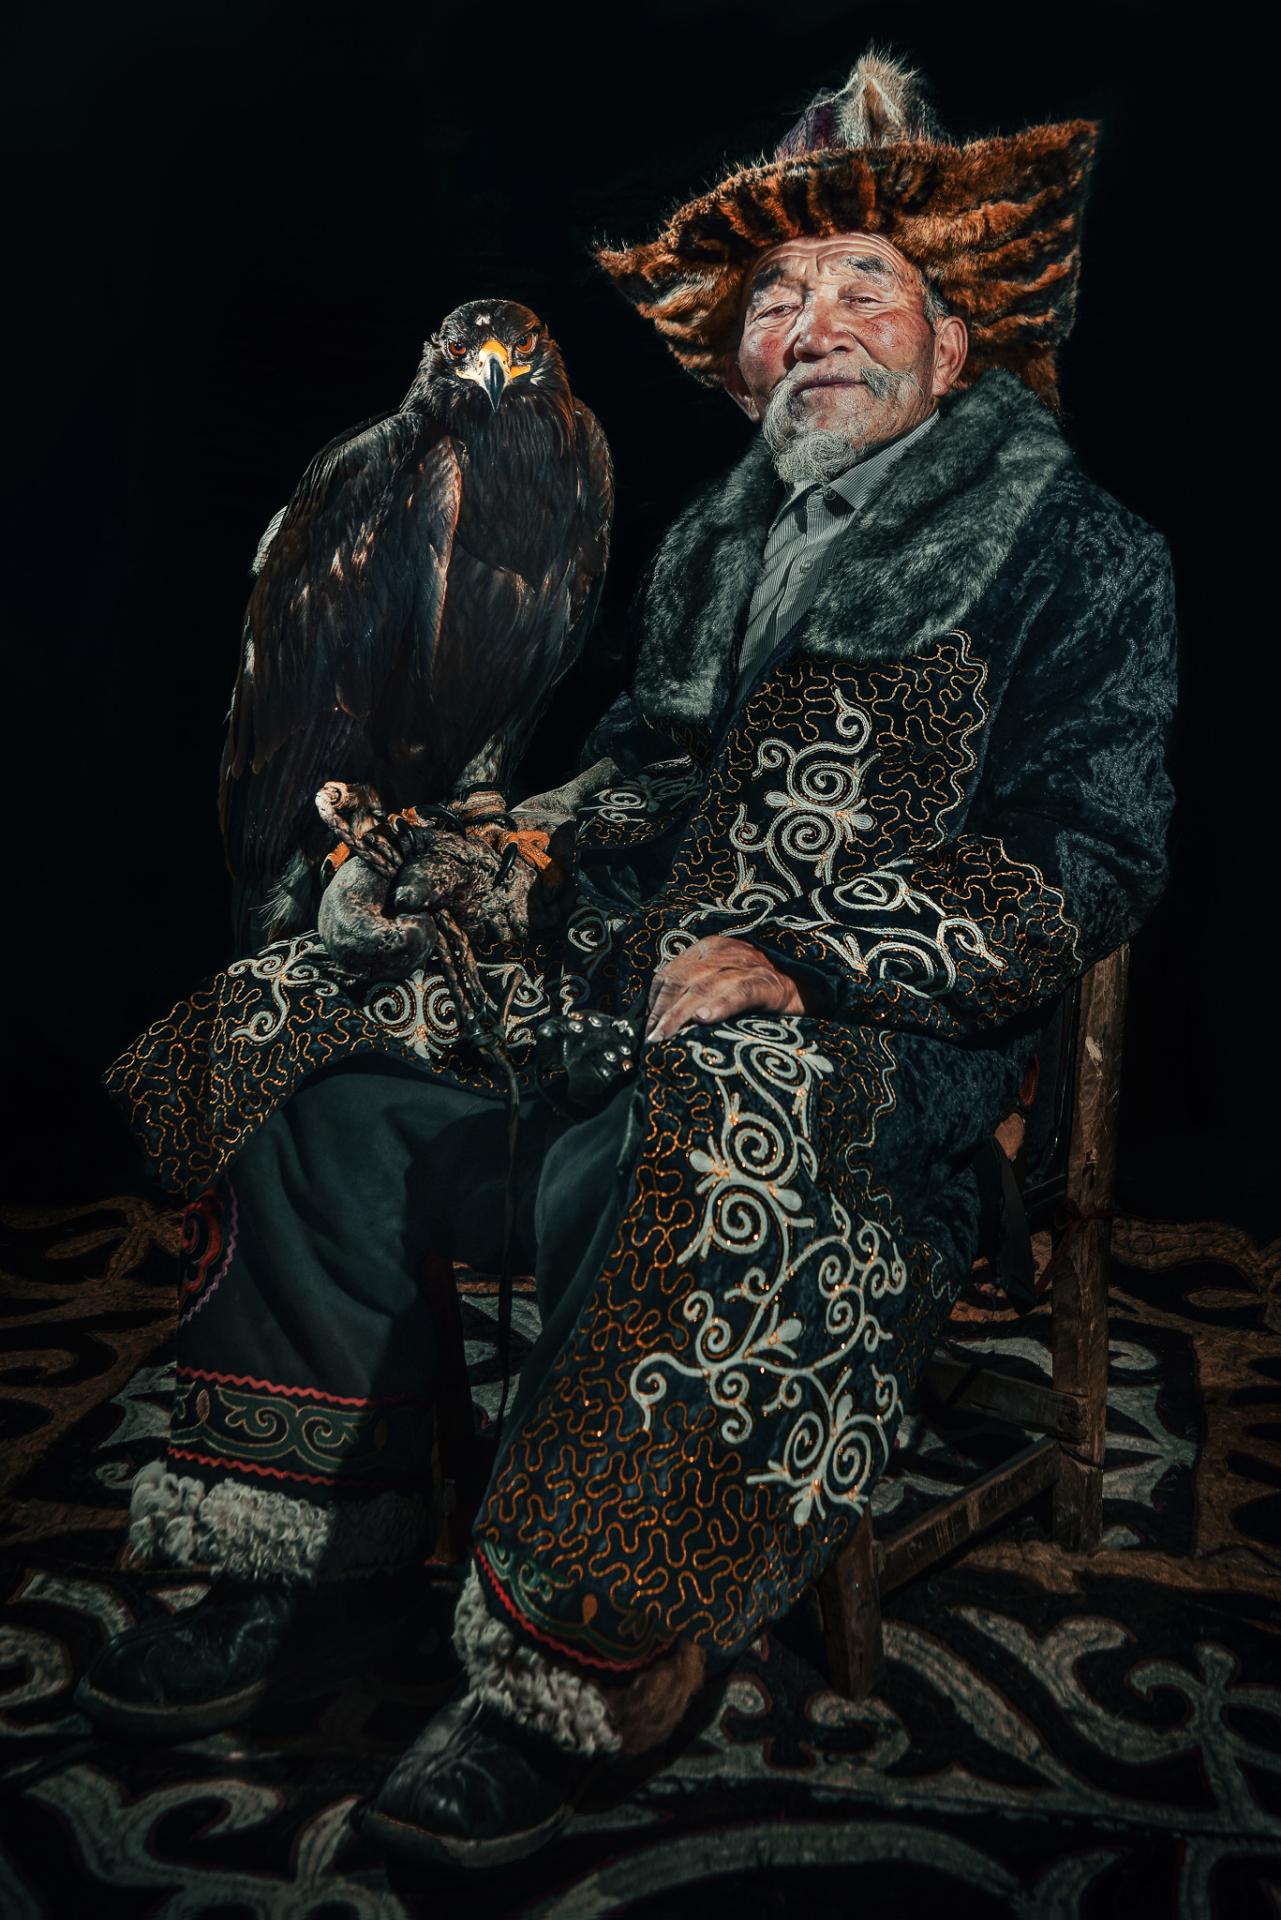 New York Photography Awards Winner - Reign of the Eagle Hunters